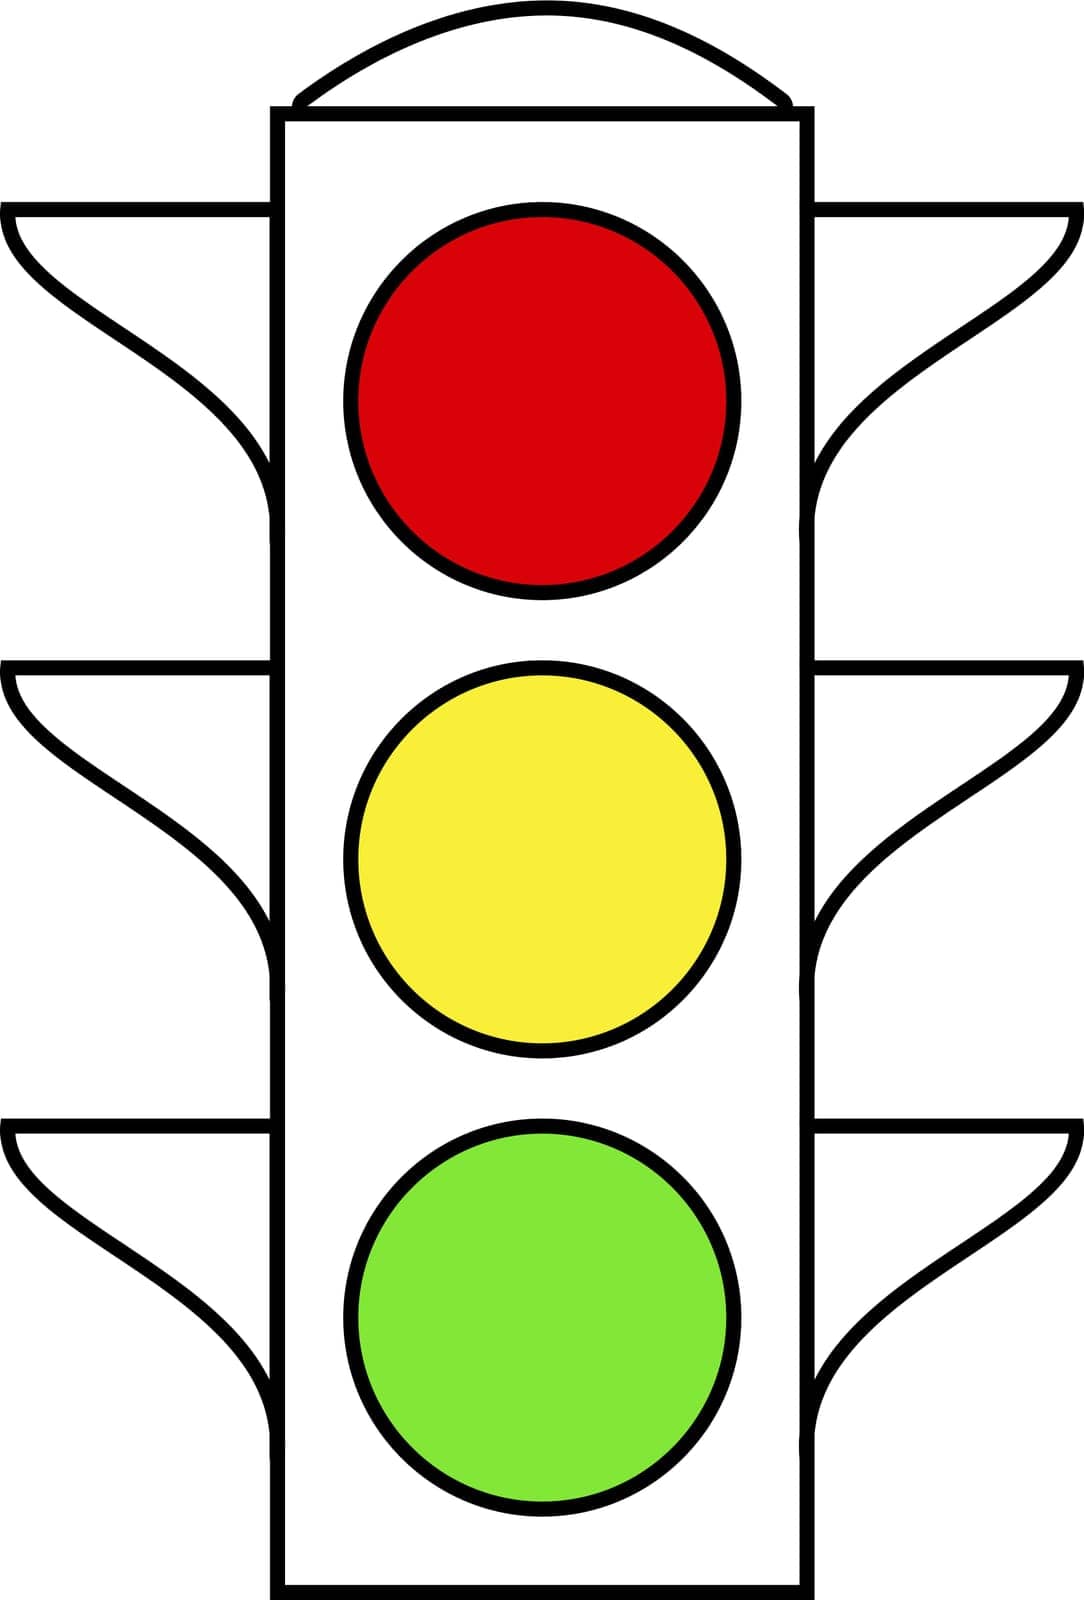 Traffic light interface icons Red, yellow green yes, no by koksikoks